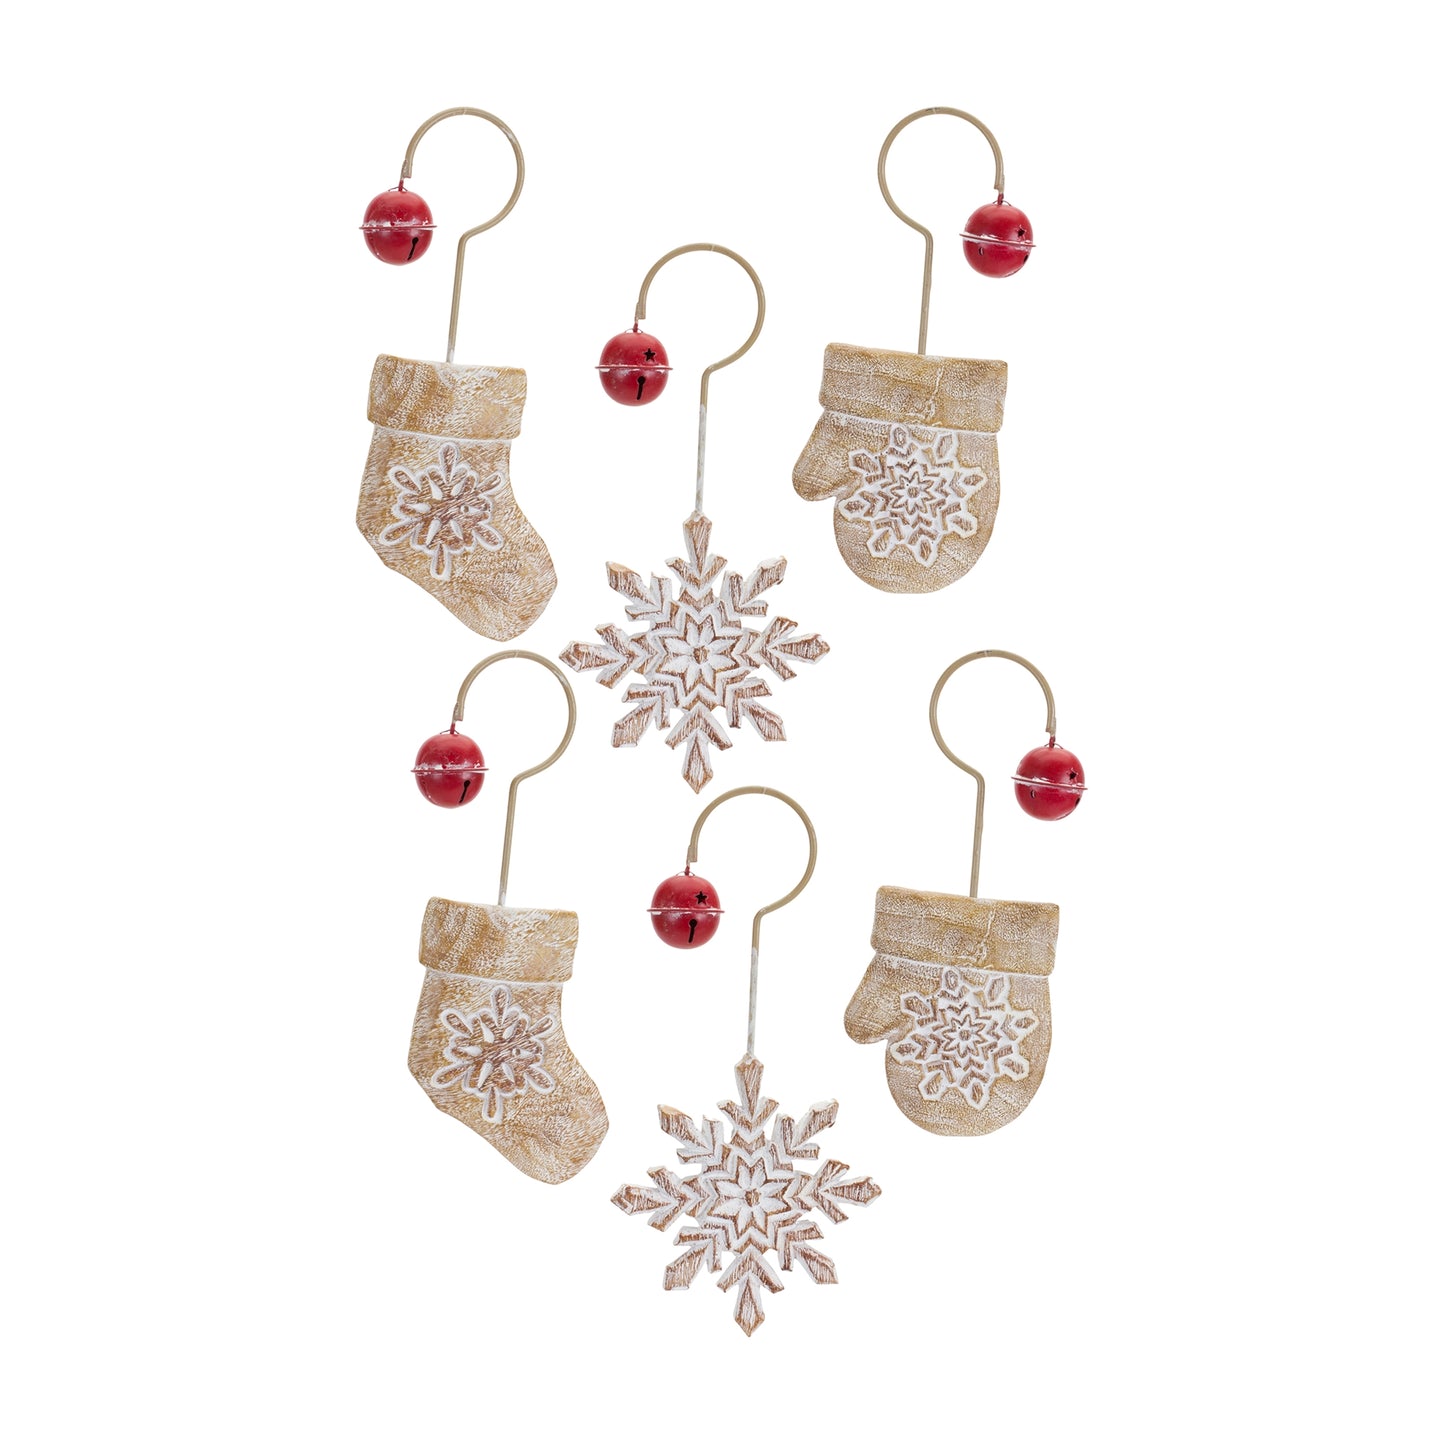 White Washed Stone Snowflake Ornmanet with Bell Accent (Set of 6)